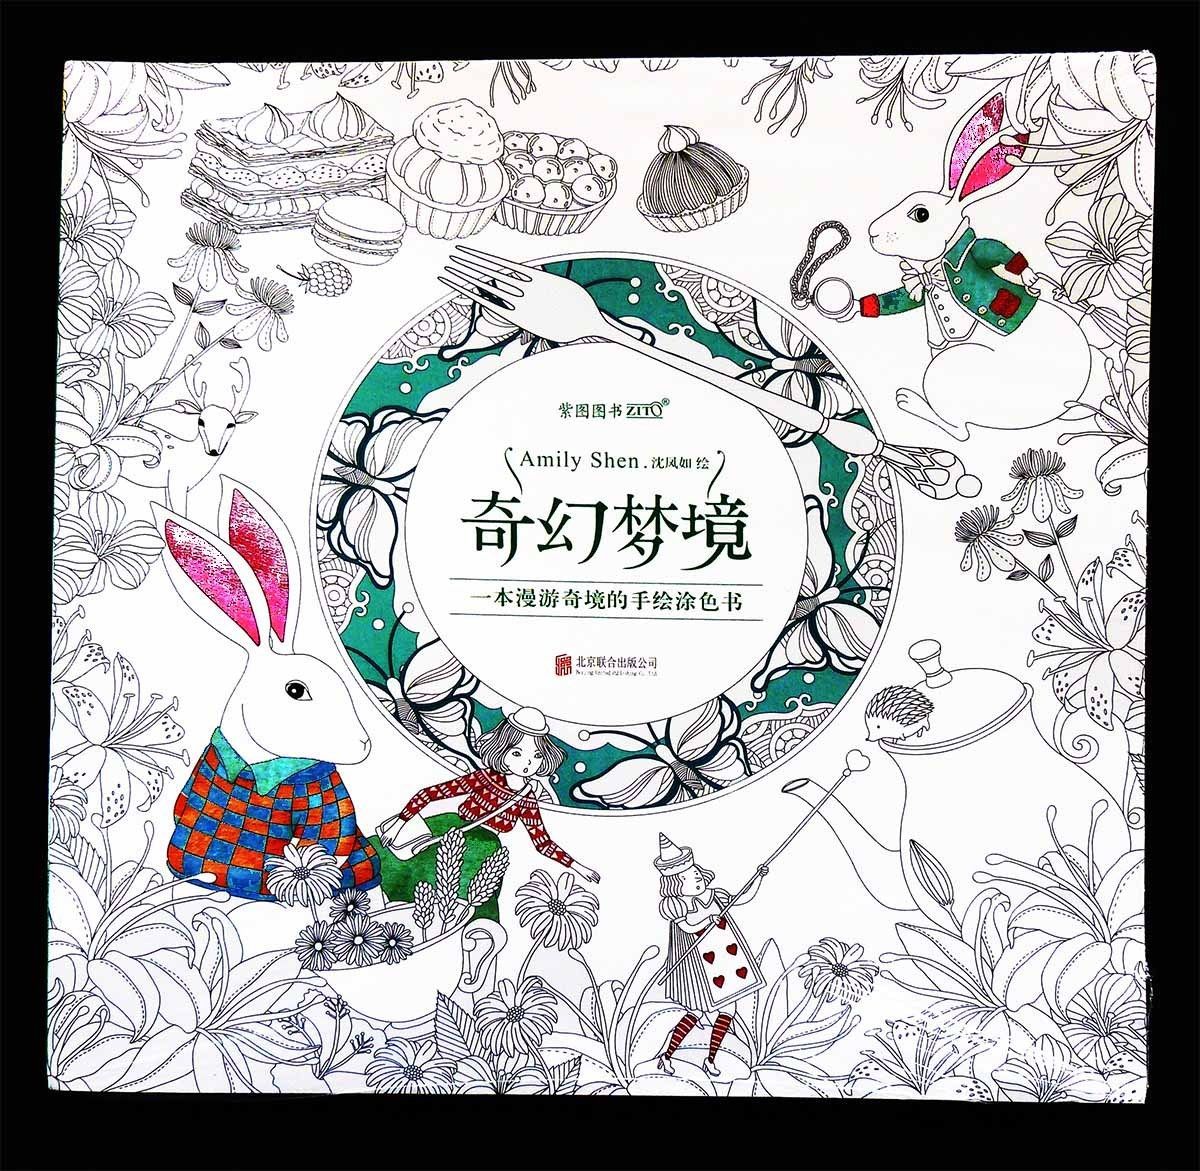 Fantasy Dream Adult Coloring Book Alice in Wonderland Themed by Amily Shen 1stEd - $35.90